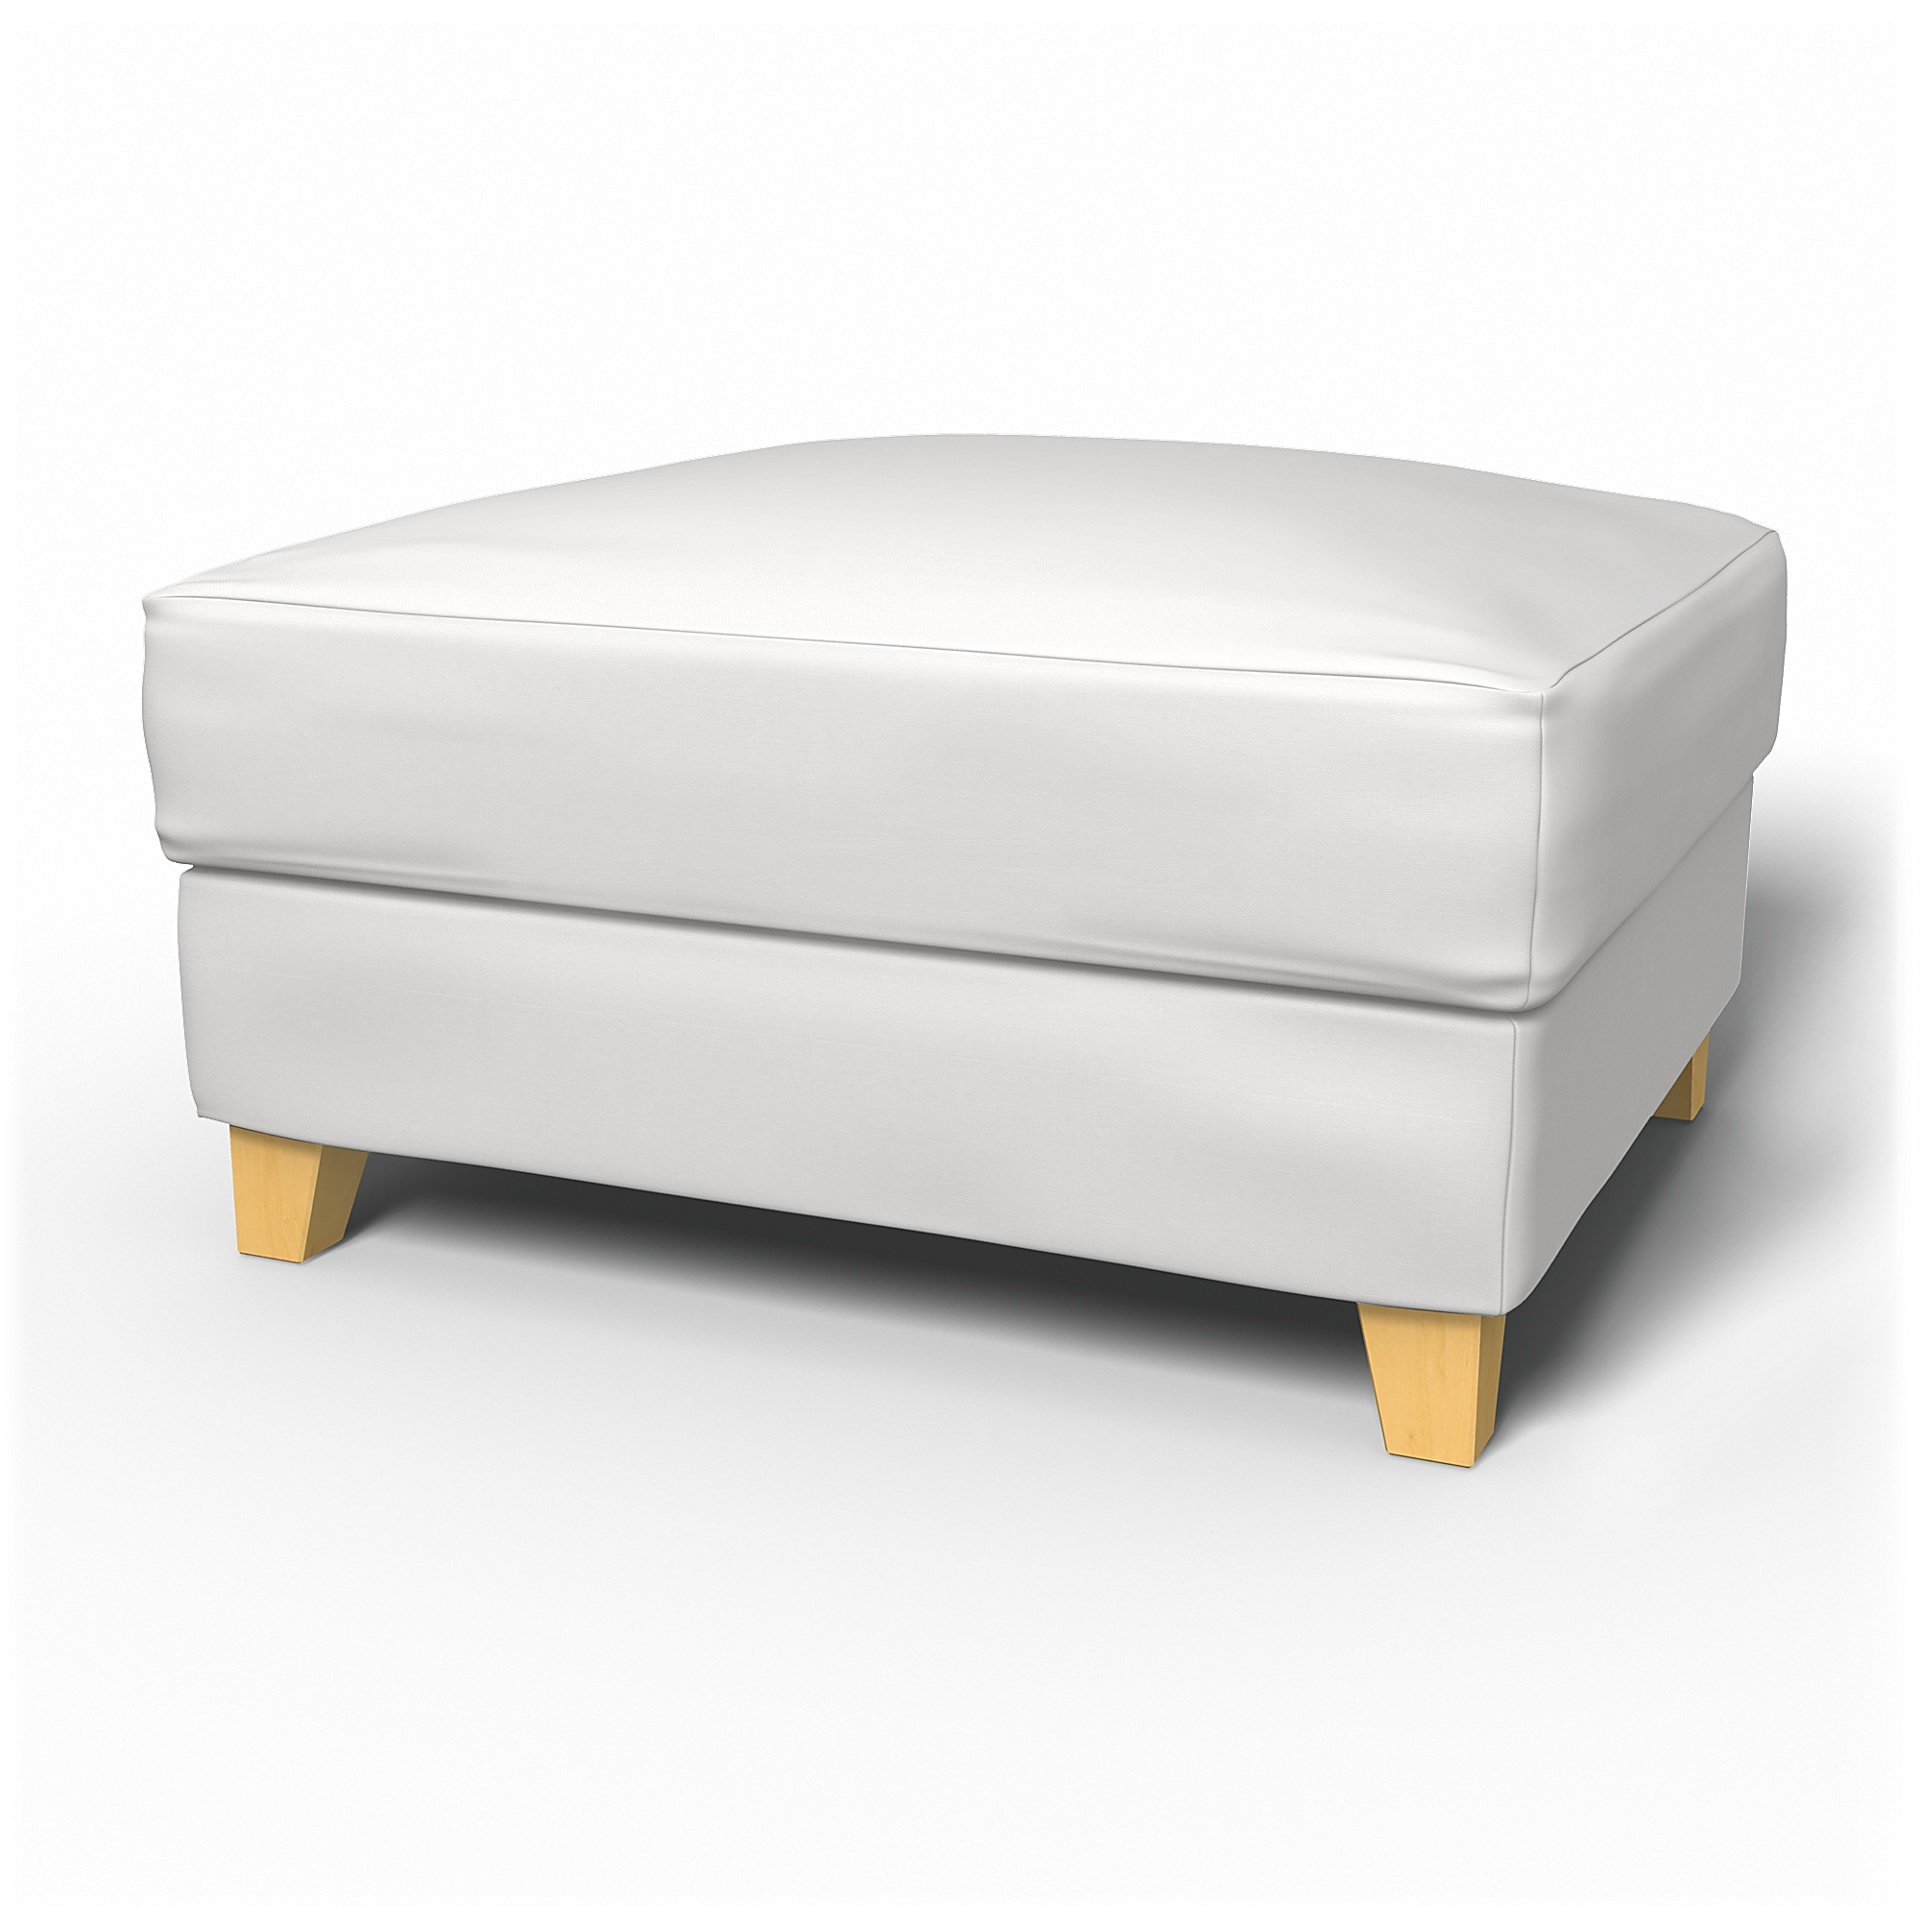 IKEA - Backa Footstool Cover, Absolute White, Cotton - Bemz